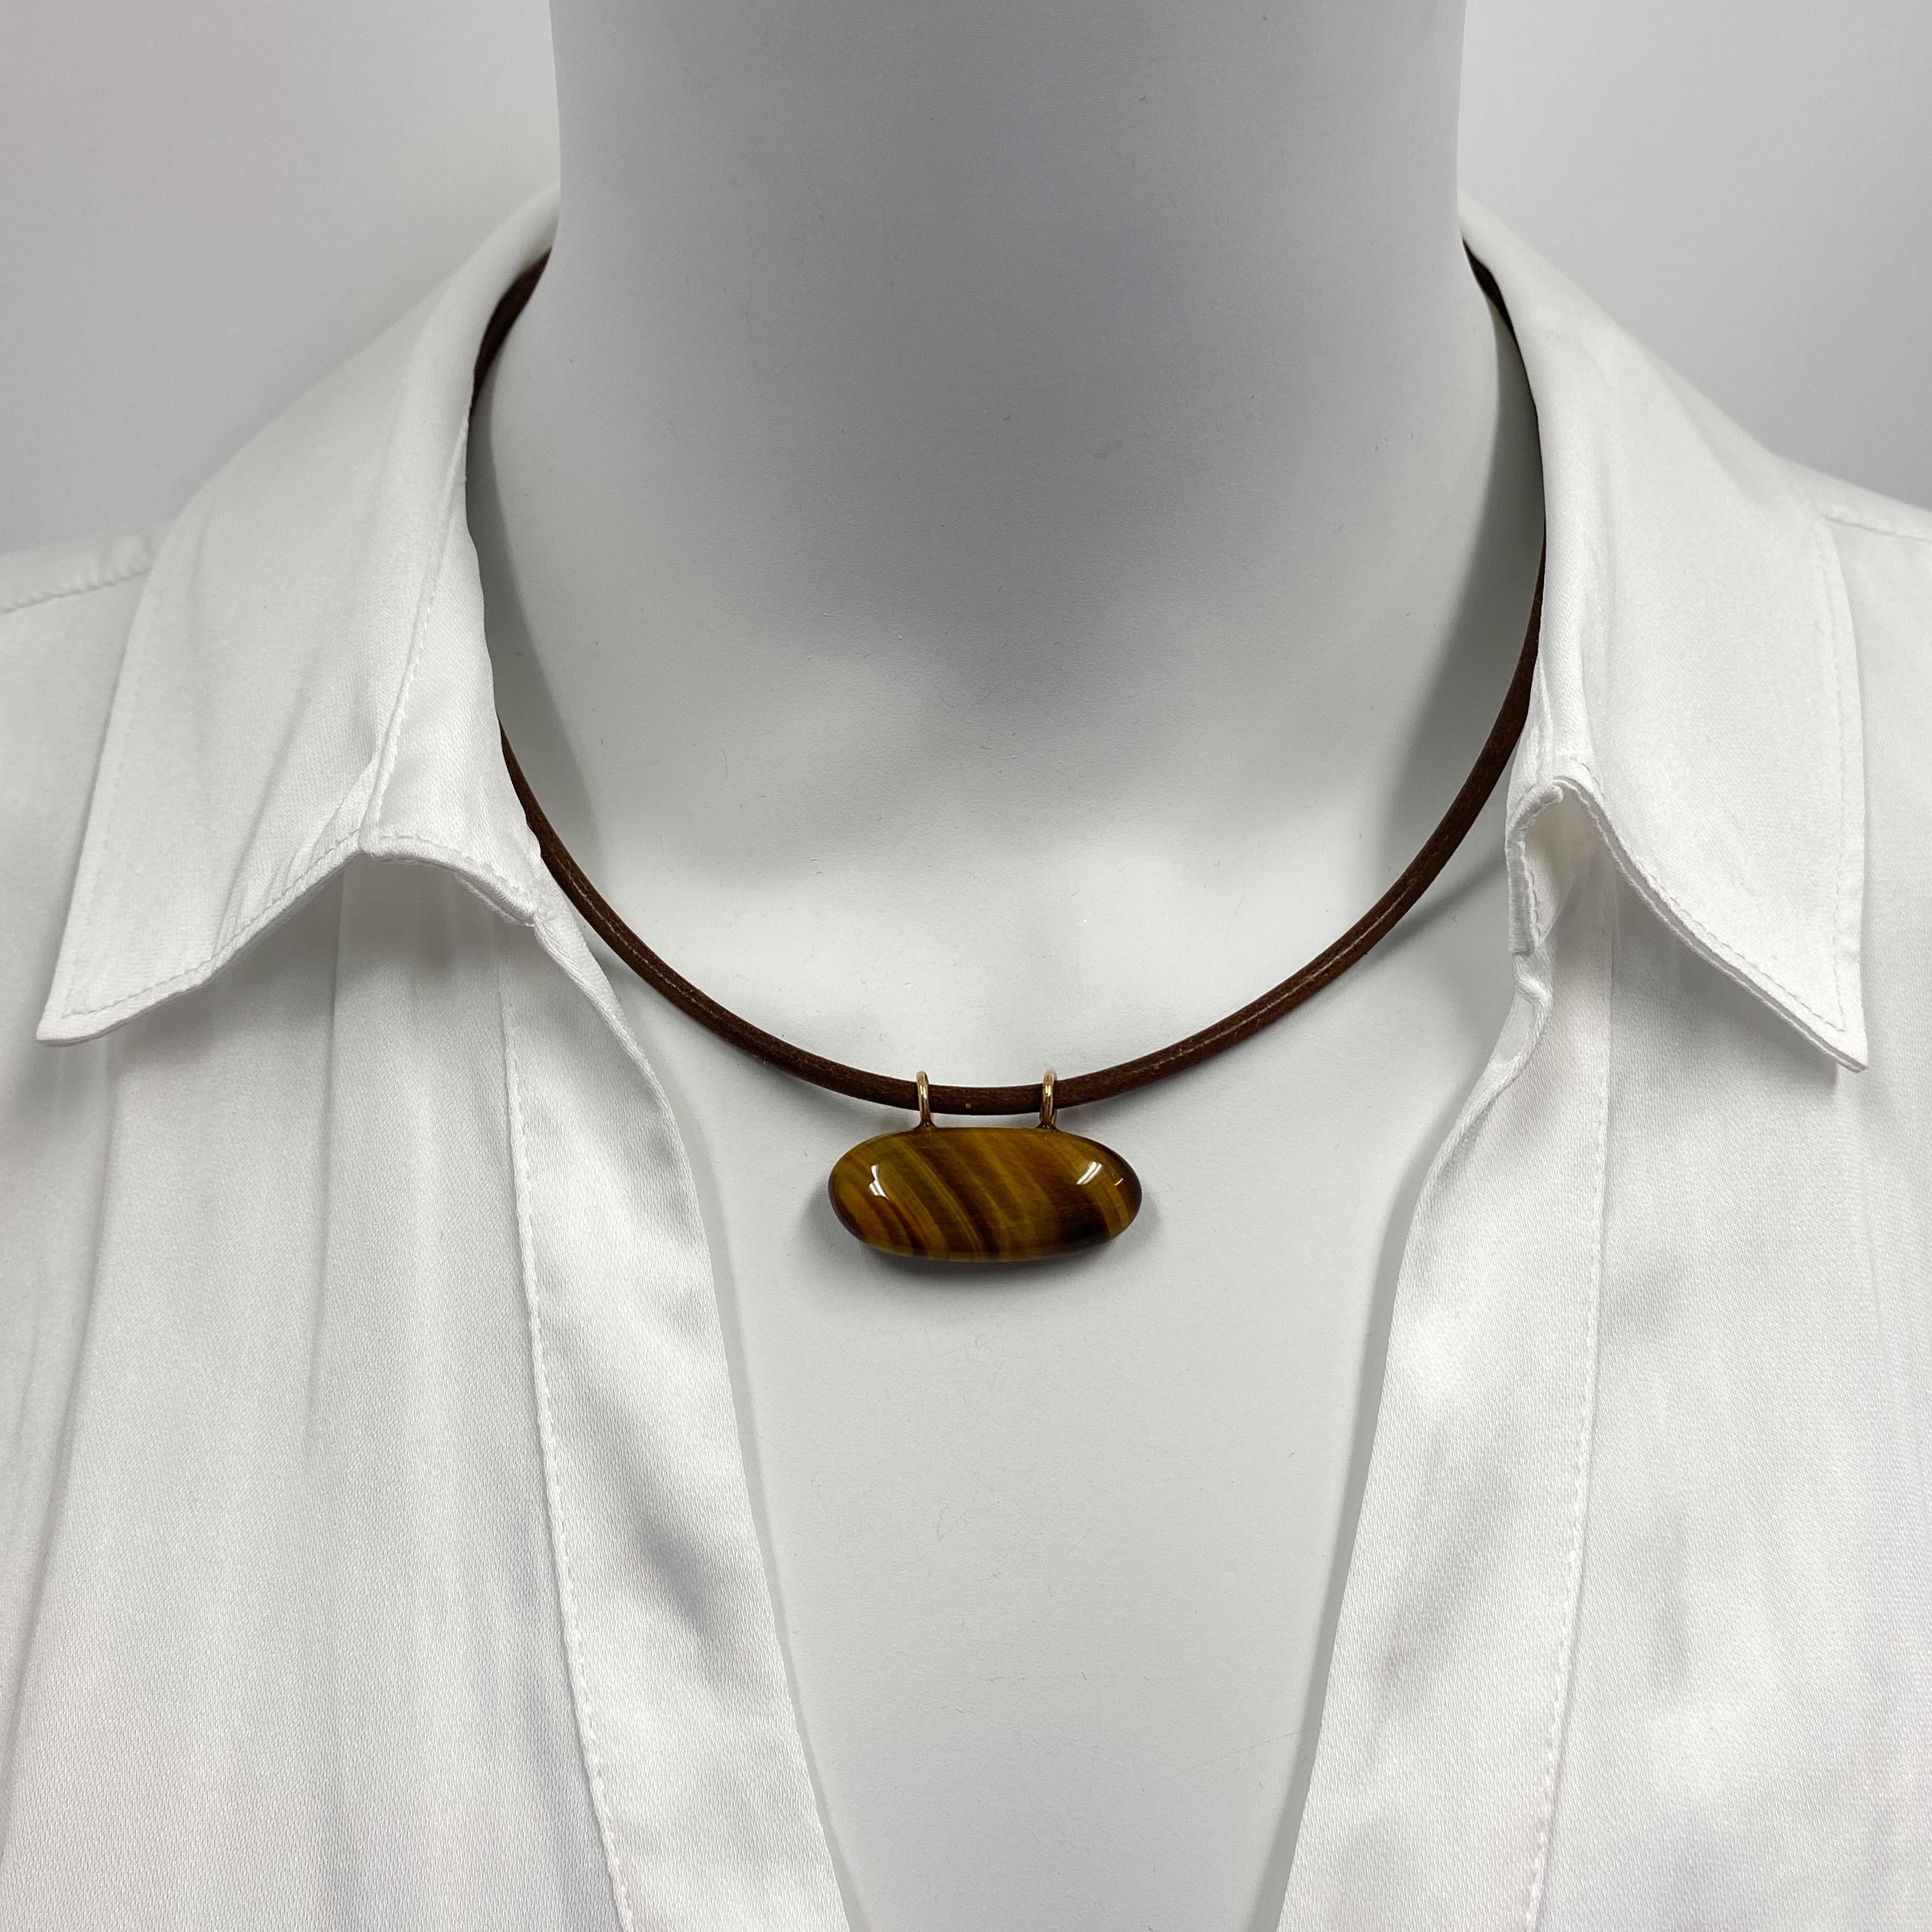 Eytan made this tumbled baguette*-shaped tigers eye quartz -- with plenty of its distinctive shimmer and play -- into a slick little pendant by the simple expedient of drilling a couple of loops into the top!  Feels great against the skin and makes